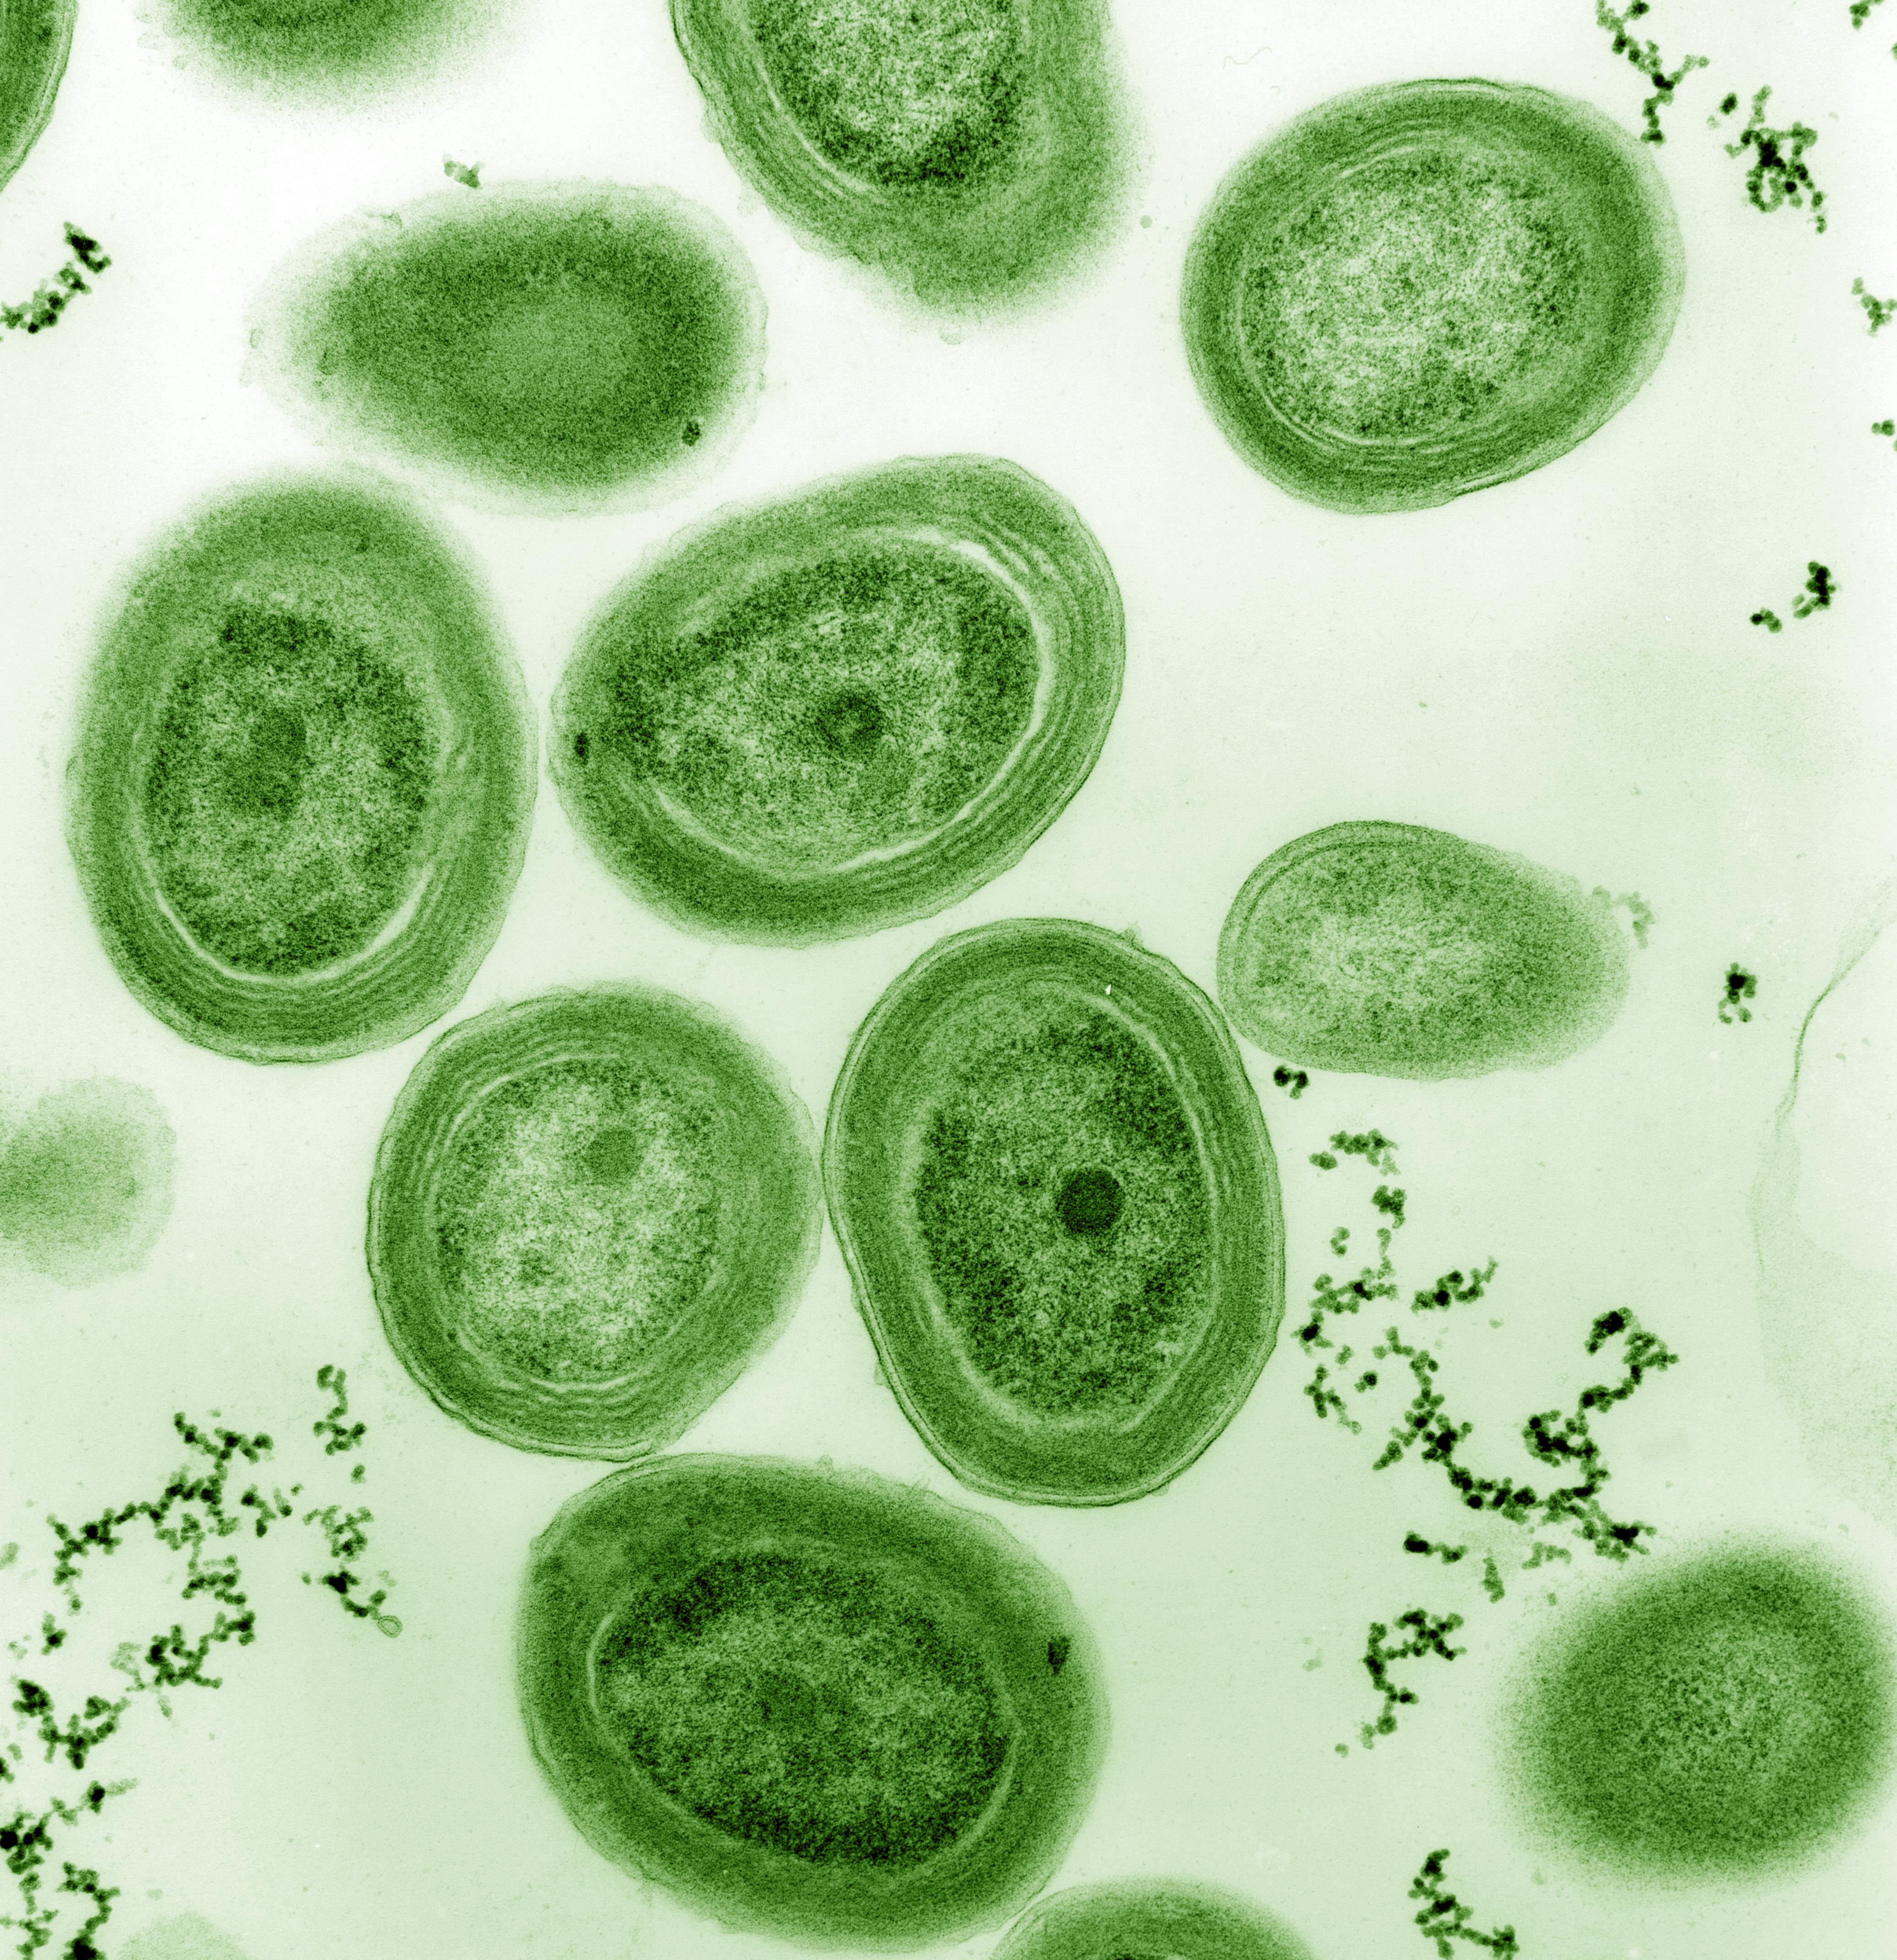 Cyanobacteria, unicellullar organisms that can perform photosynthesis. They were key in the development of life and radically changed Earth by releasing oxygen to our atmosphere (Source: Chisholm Lab, Wikipedia)